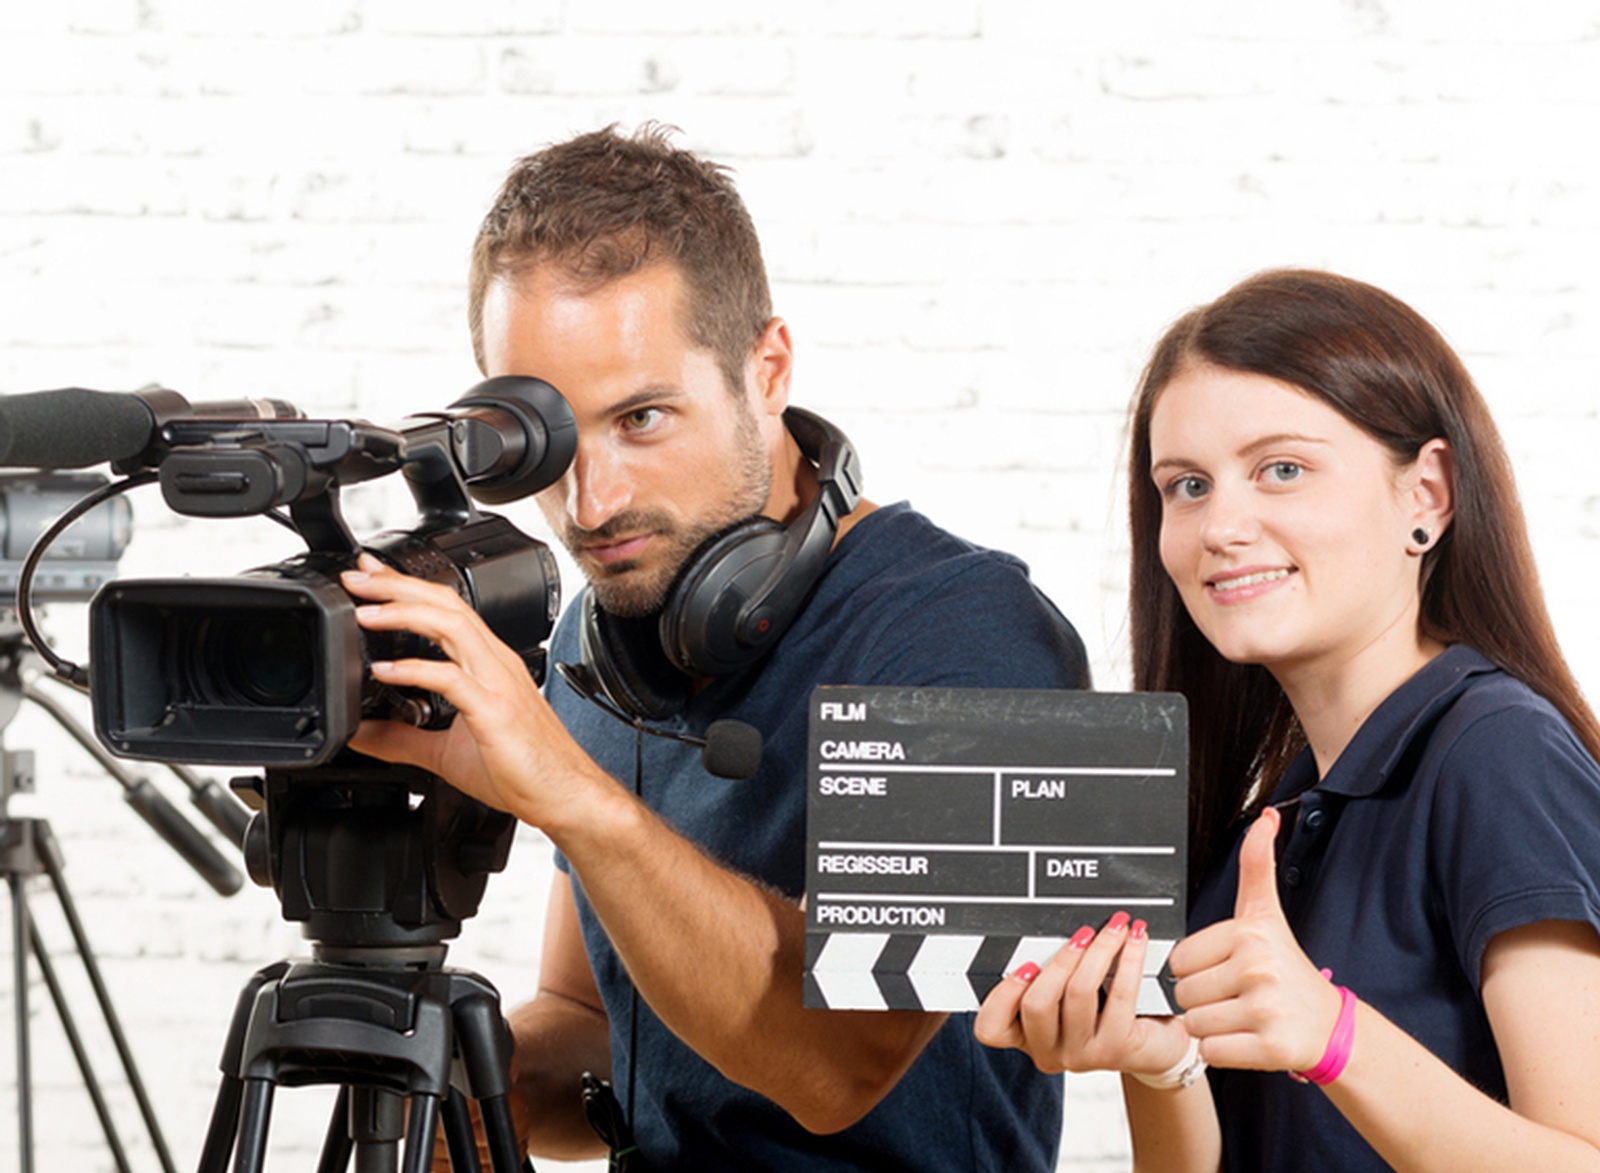 Corporate Video Production & Video Marketing for Businesses in Tulsa, Oklahoma